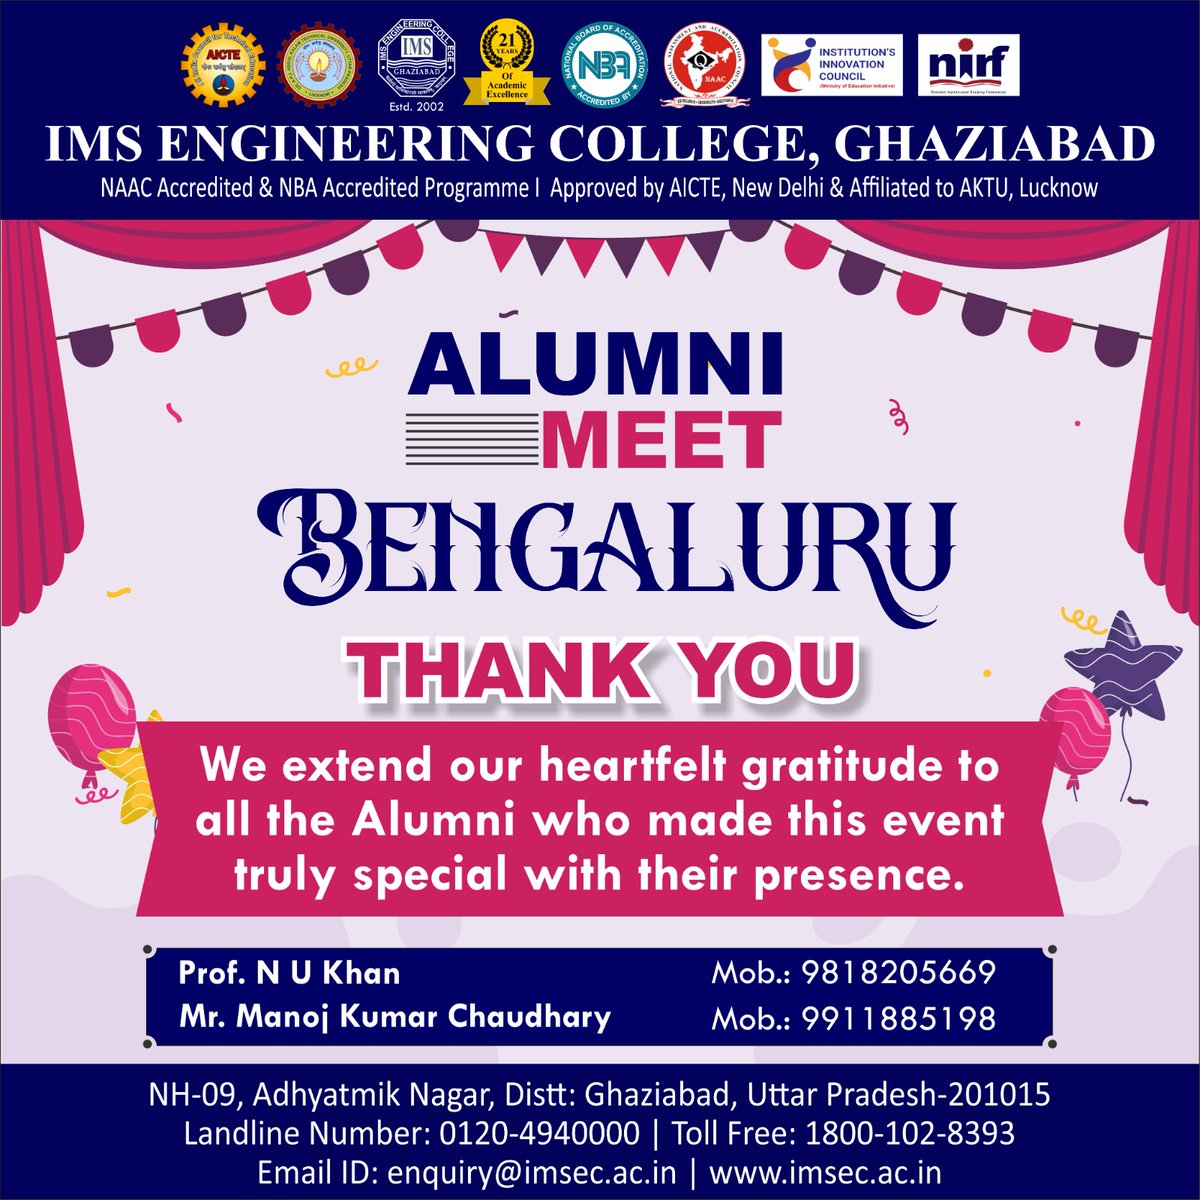 We extend our heartfelt gratitude to all the Alumni who graced the event of Alumni Meet (Bengaluru Chapter – 2023) with their presence and made this event truly special.
.
.
.
#imsec143 #engineeringcollege #colleges #AKTU #bangalore #reconnect #AlumniChapter #nostalgia #bengaluru